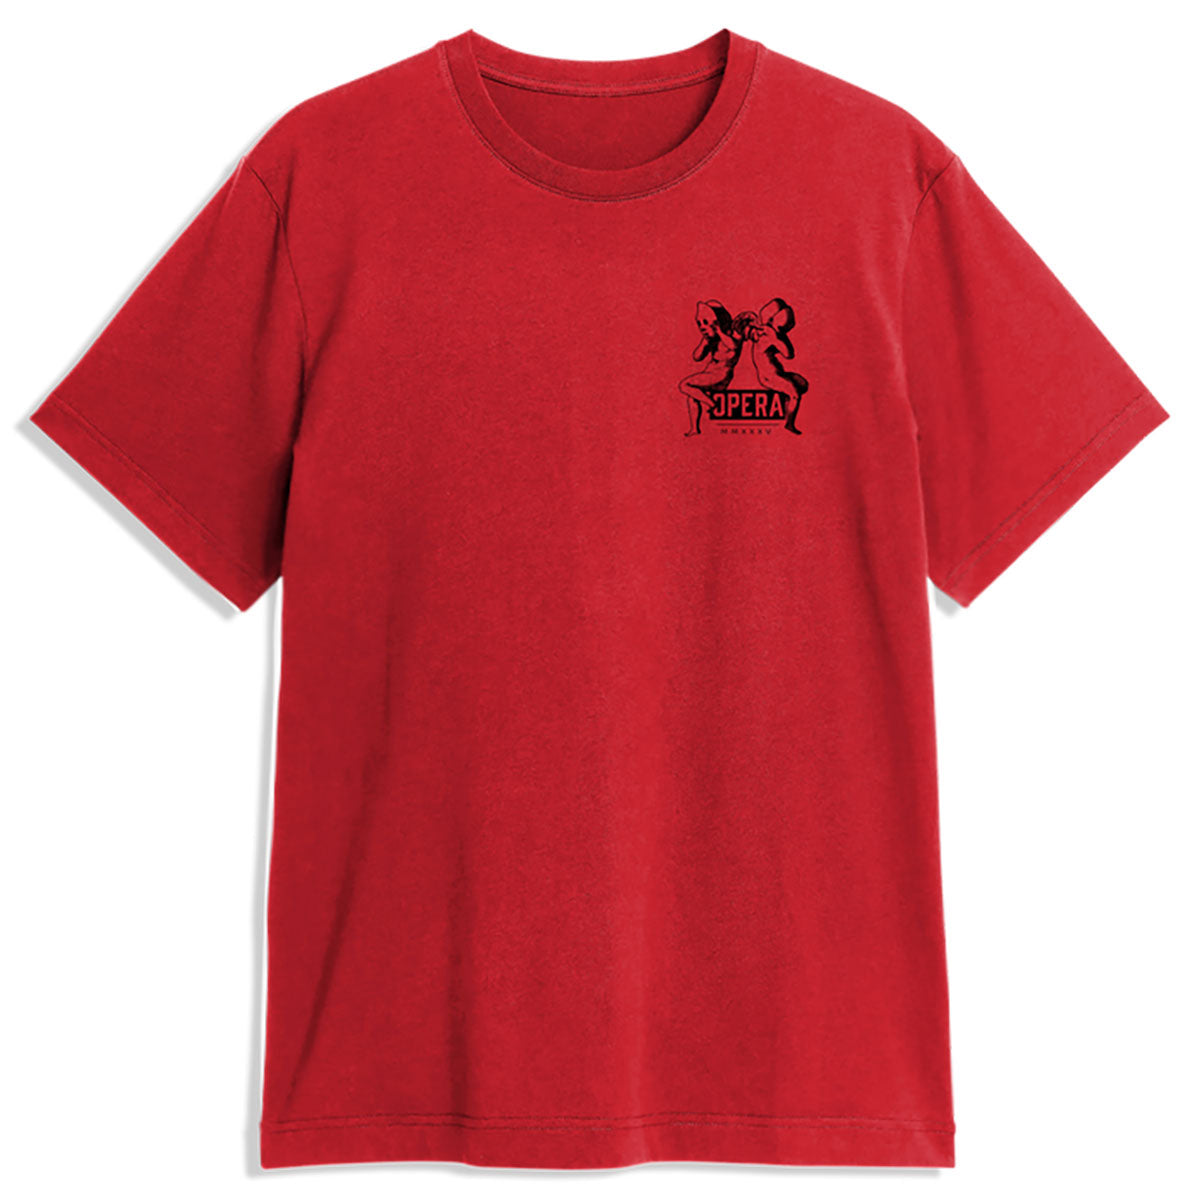 Opera Angels T-Shirt - Antique Cherry Red image 2